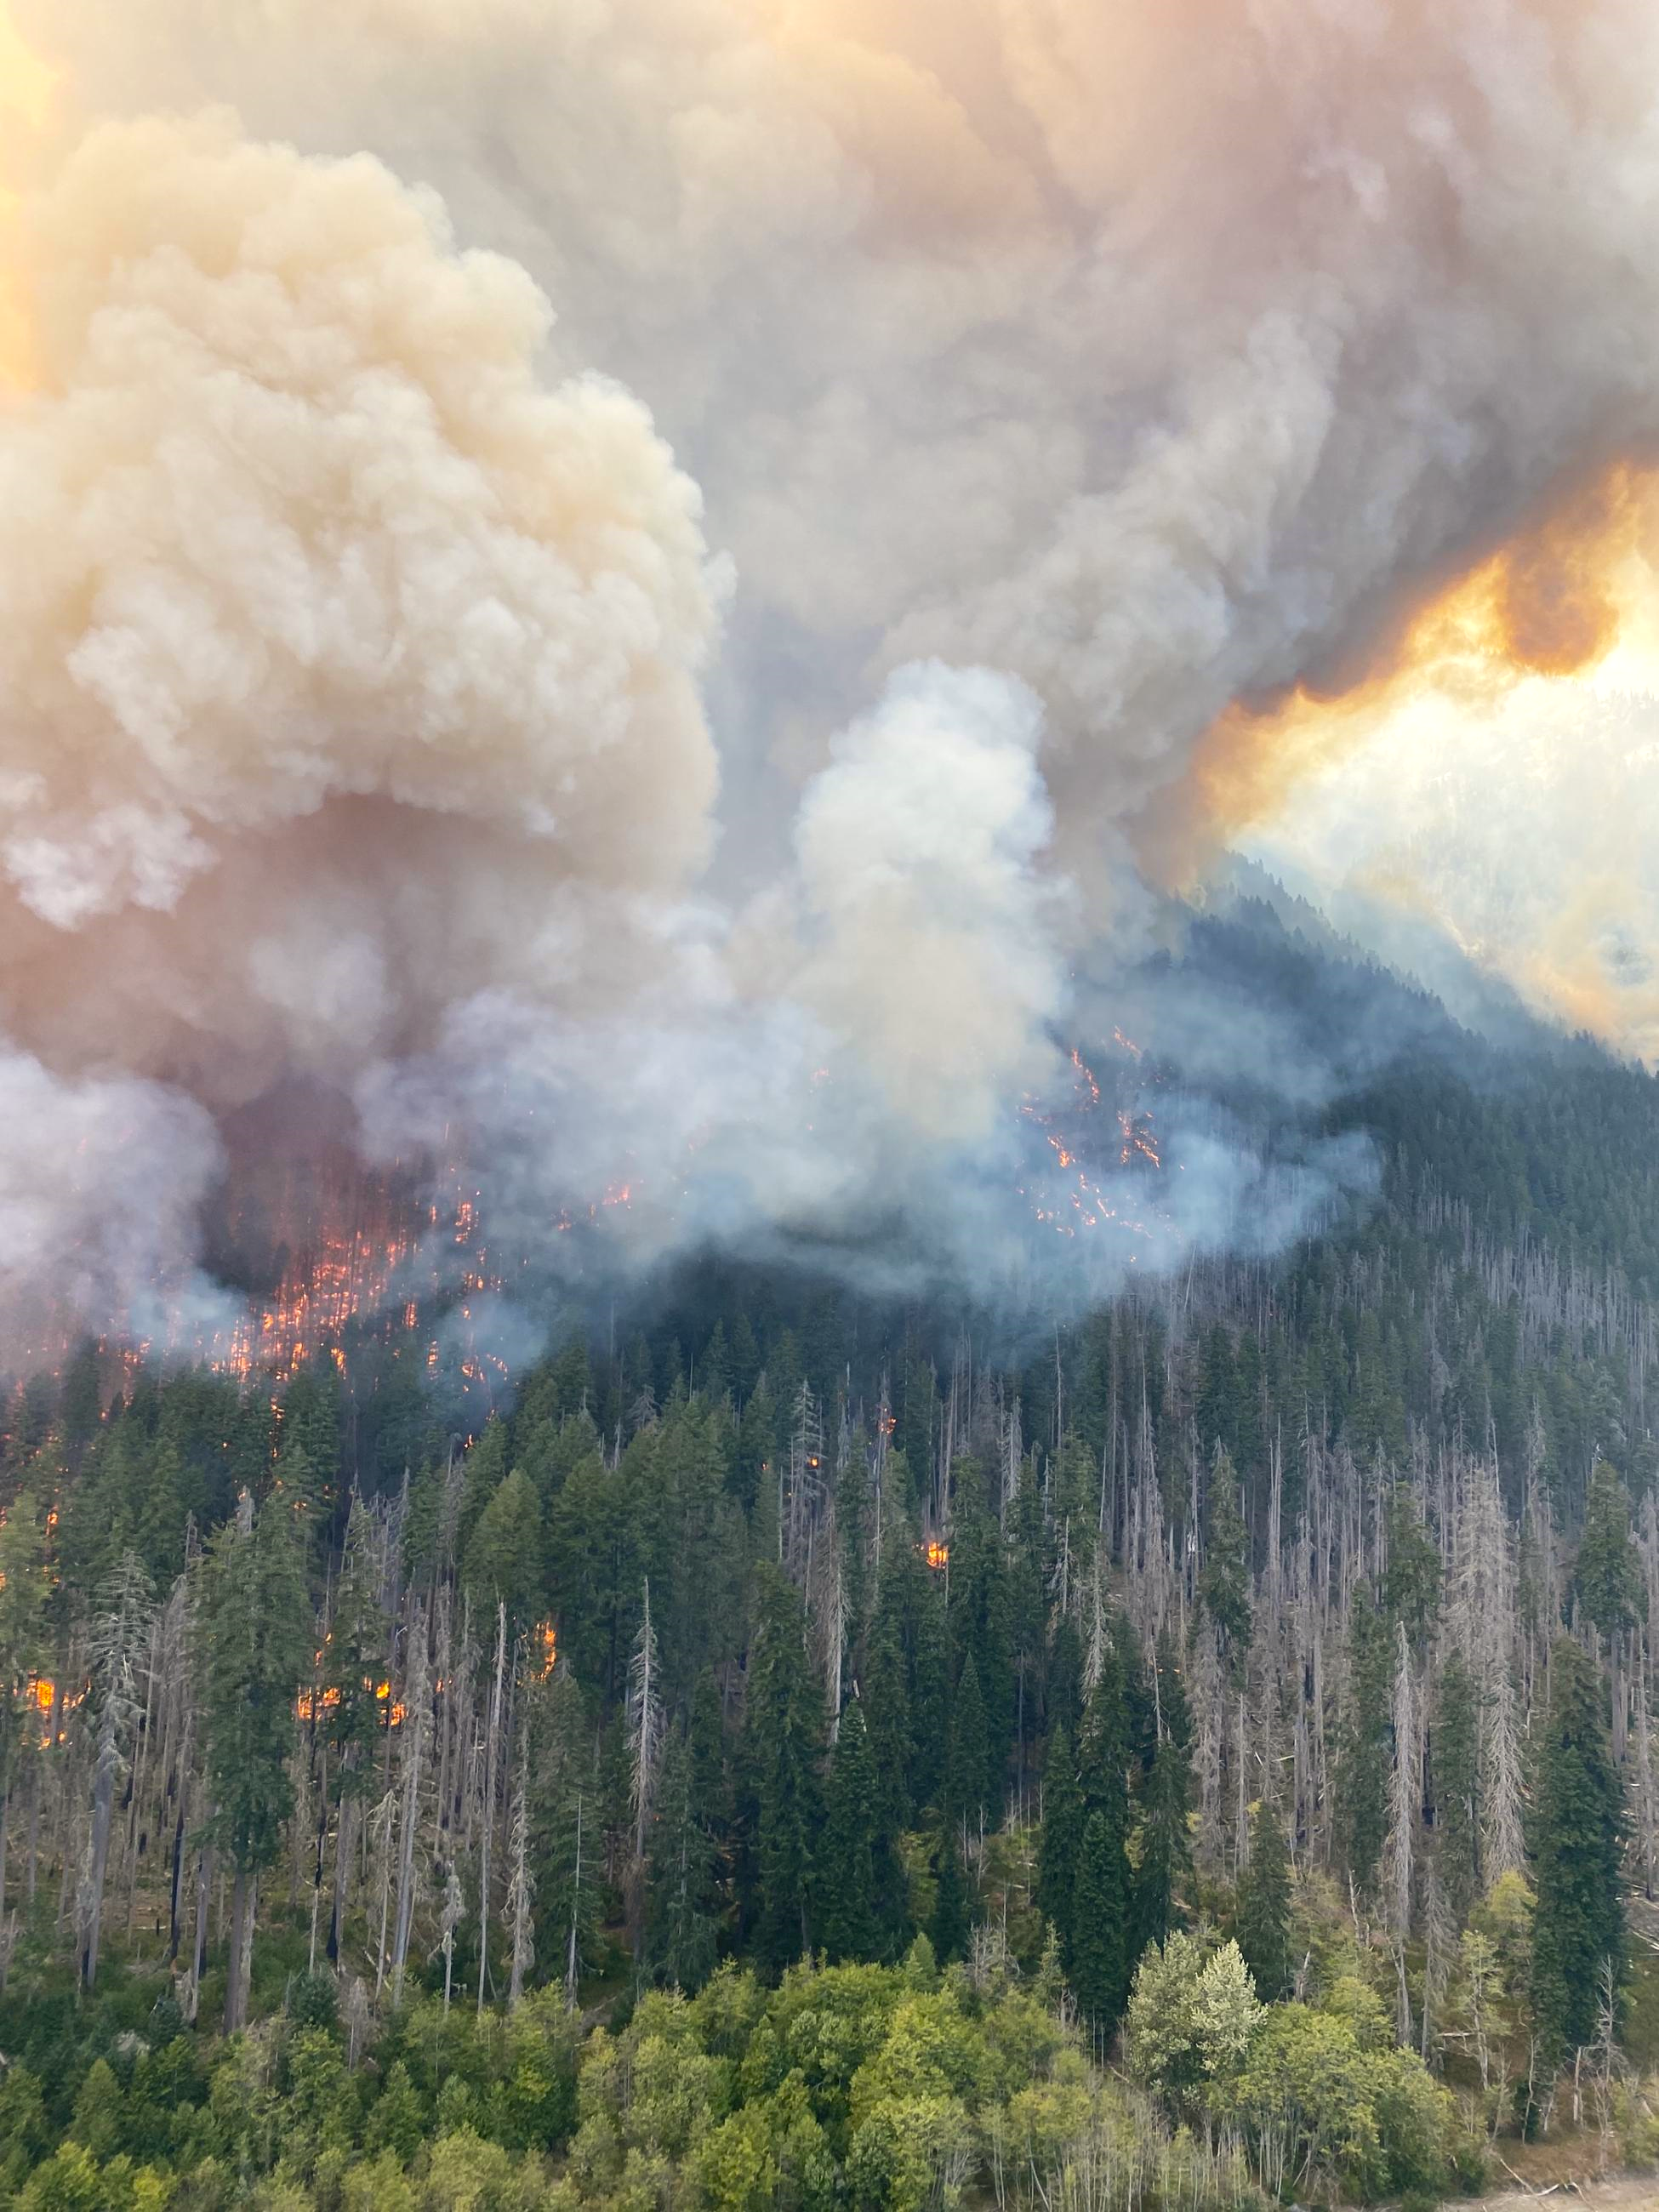 A mountainside with flames and a large smoke plume.